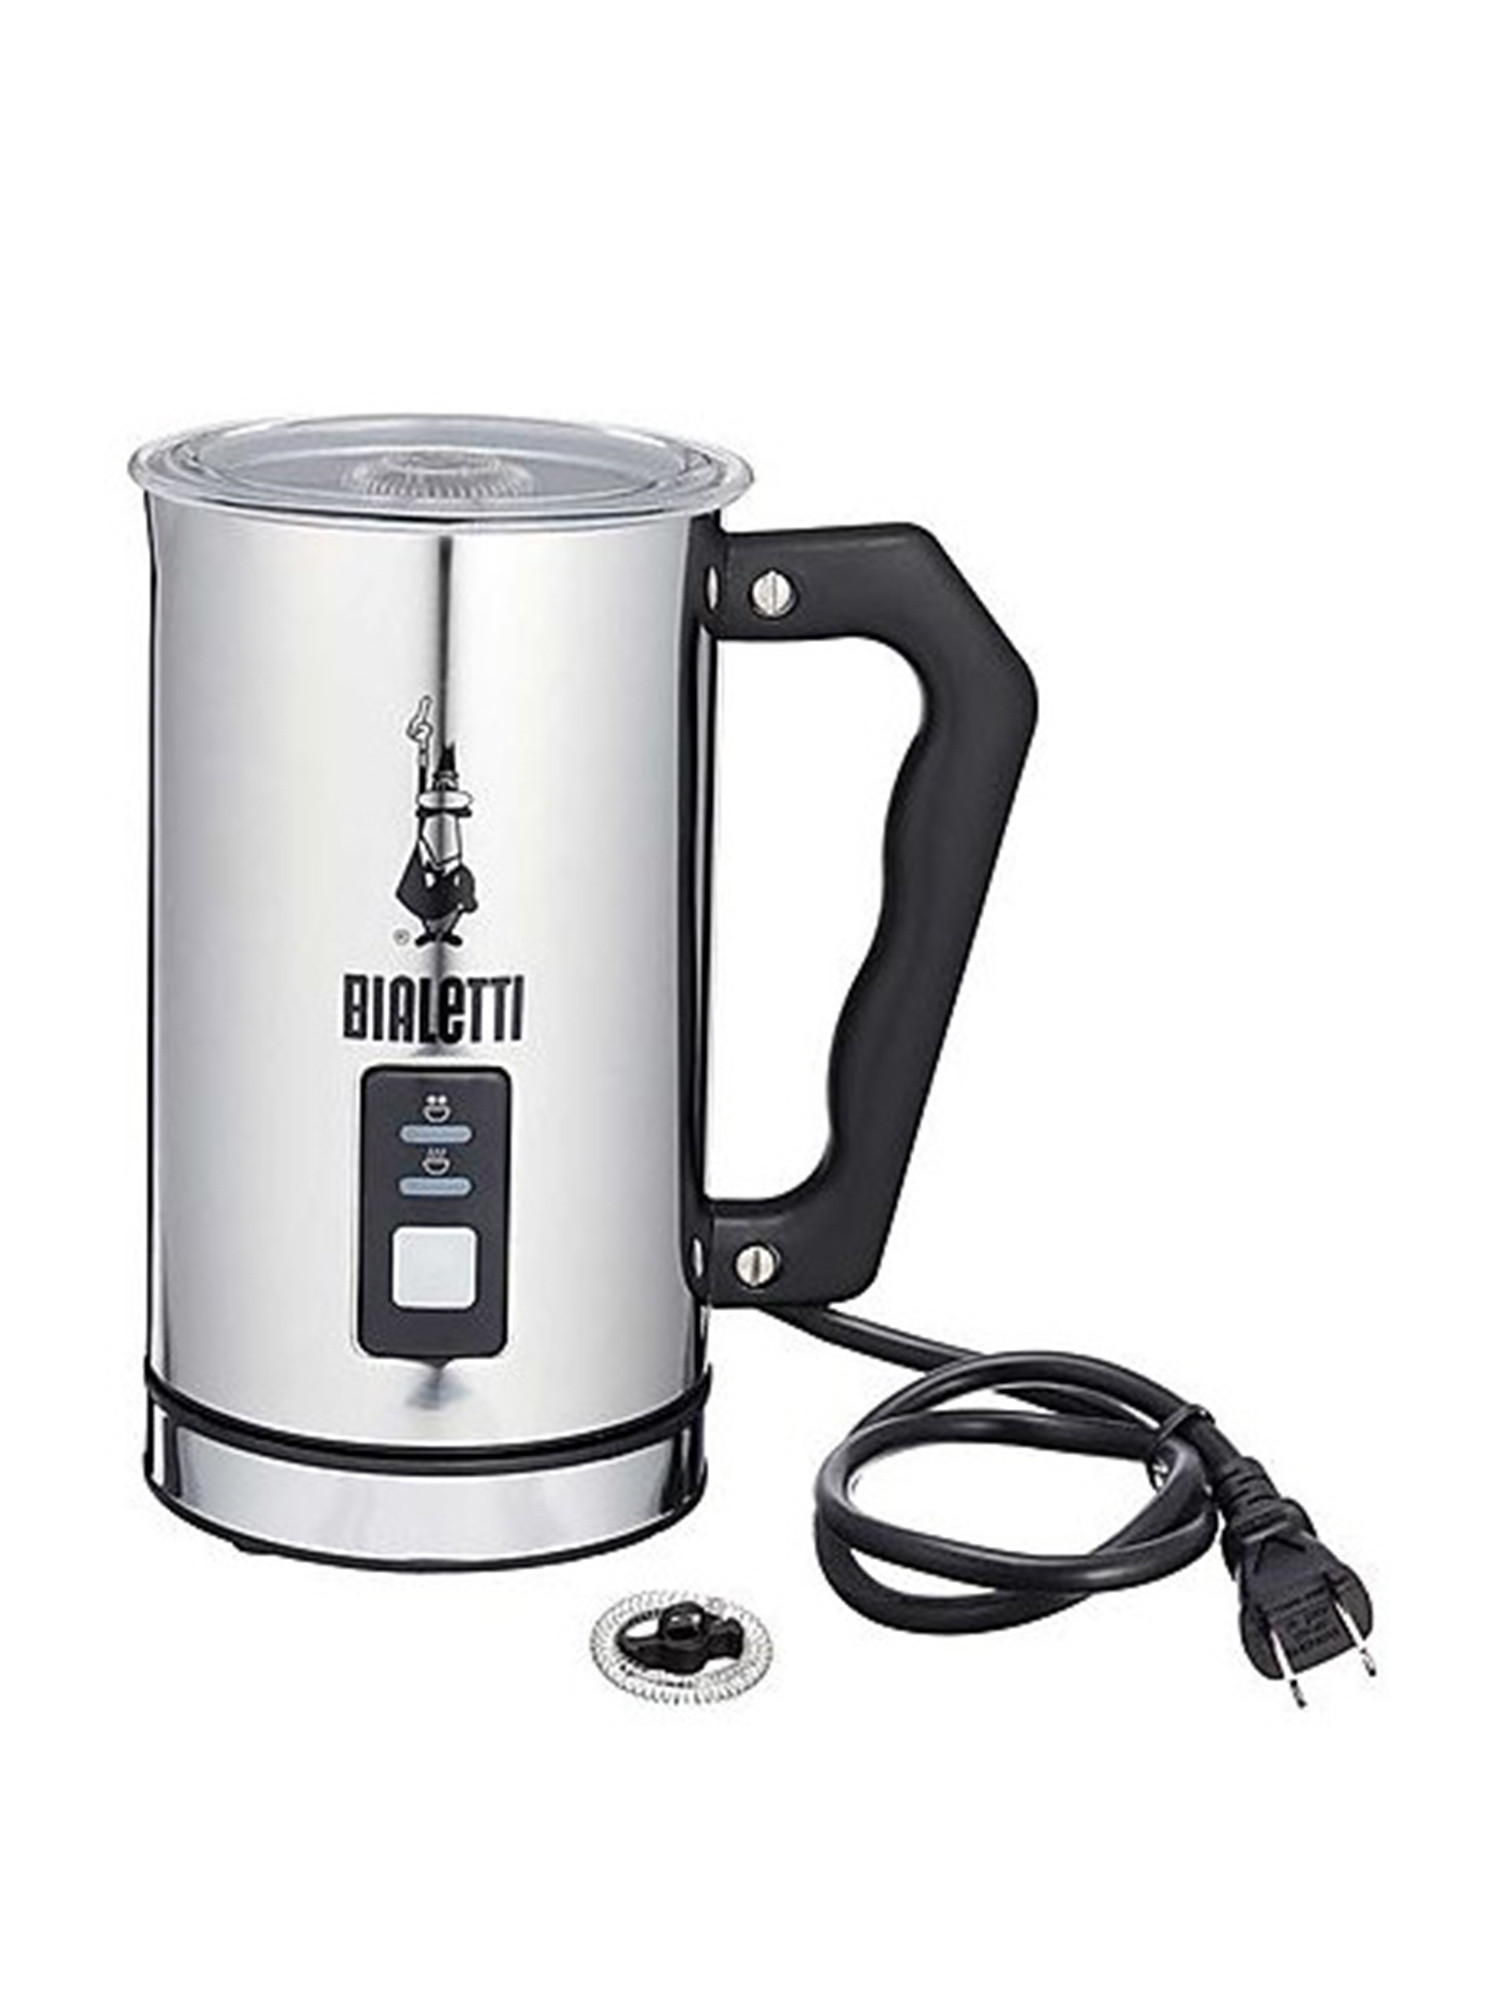 Bialetti - Milk Frother, Grey, large image number 0